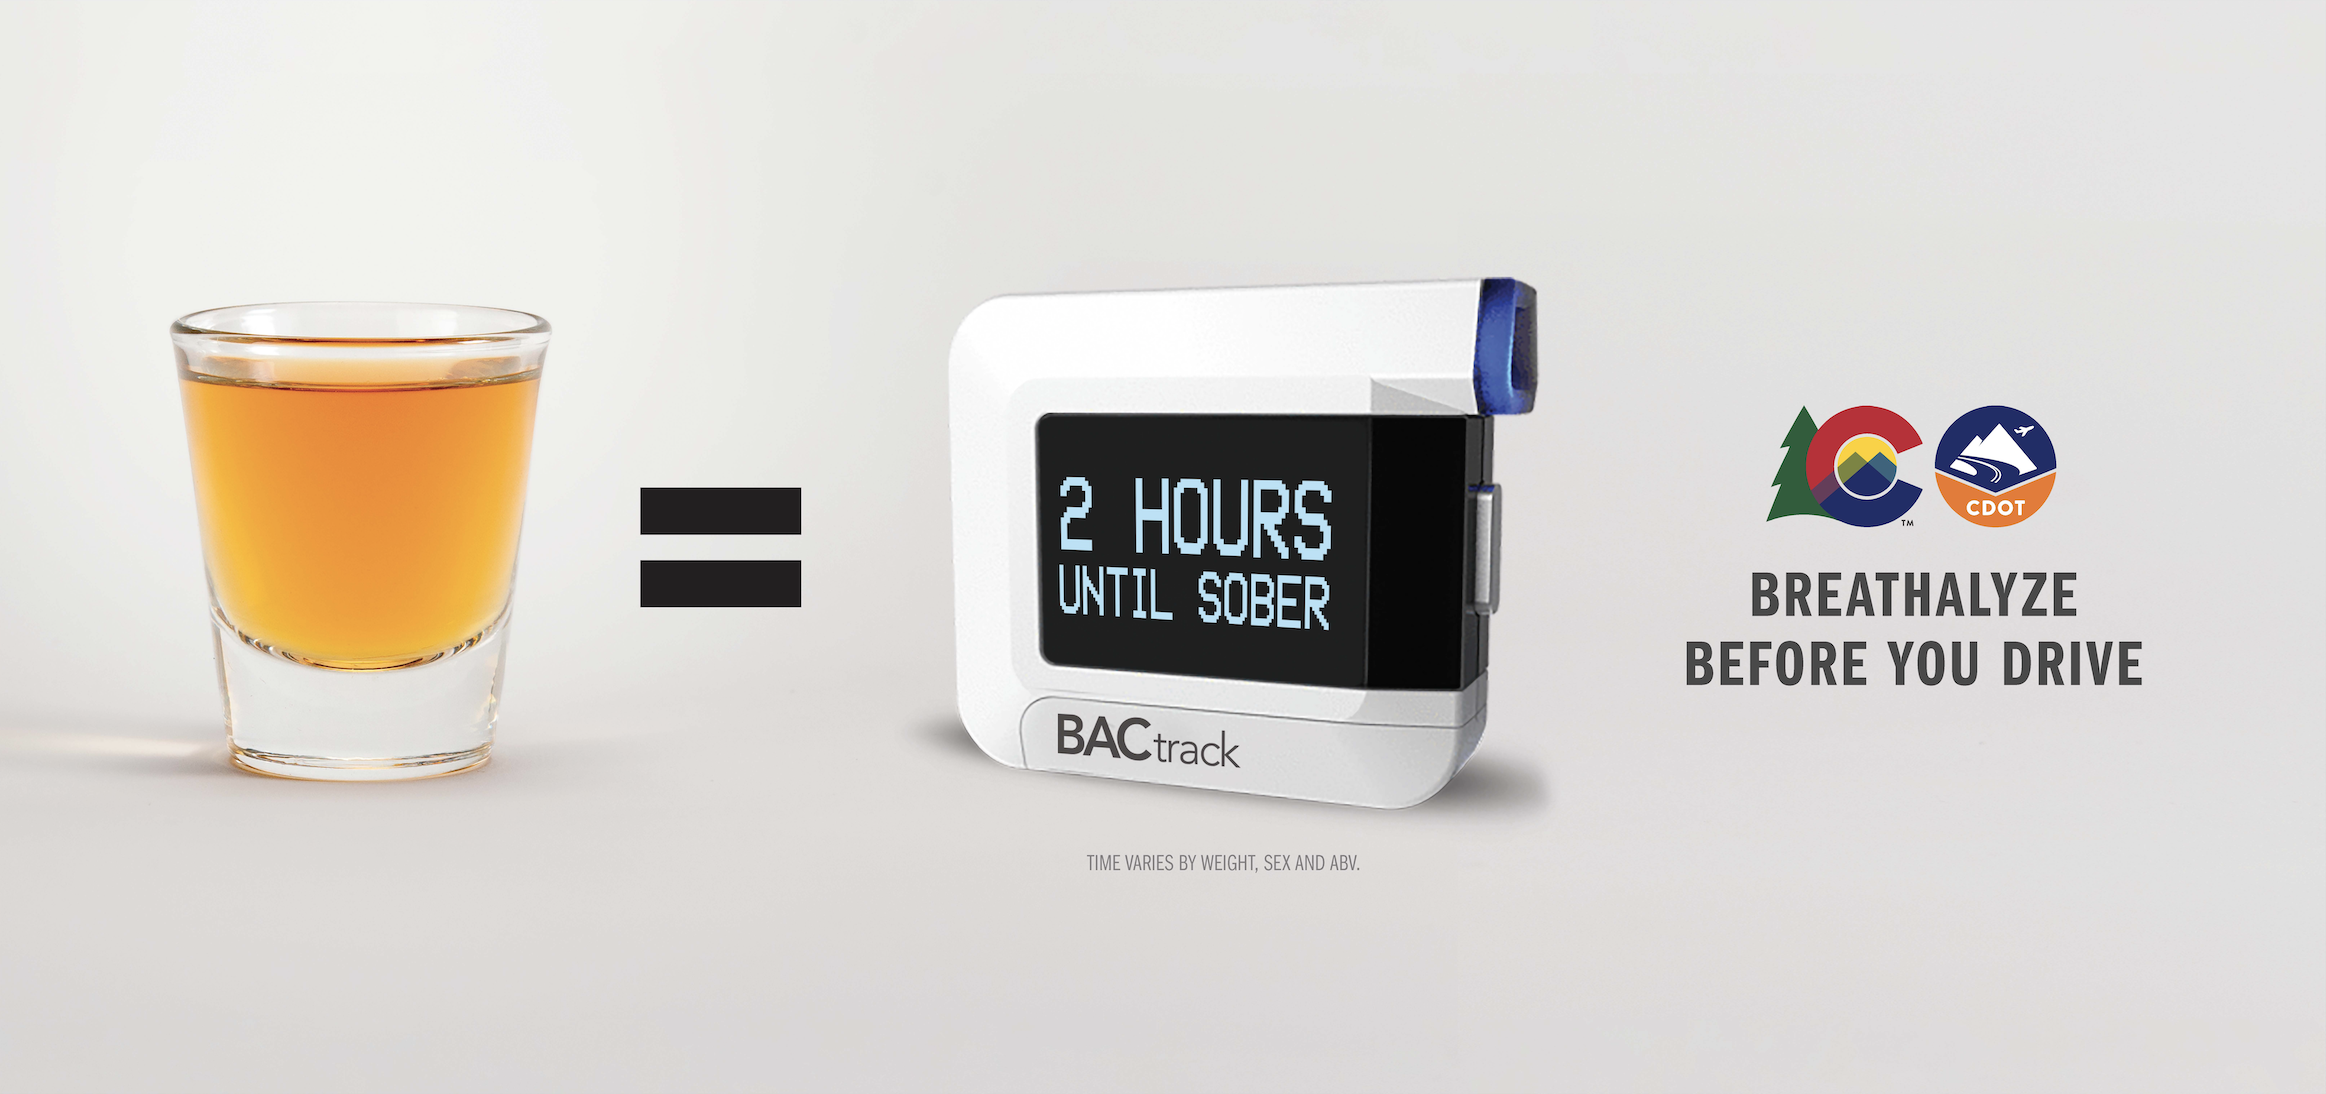 Take Some Time promotional graphic for Breathalyze Before You Drive campaign detail image